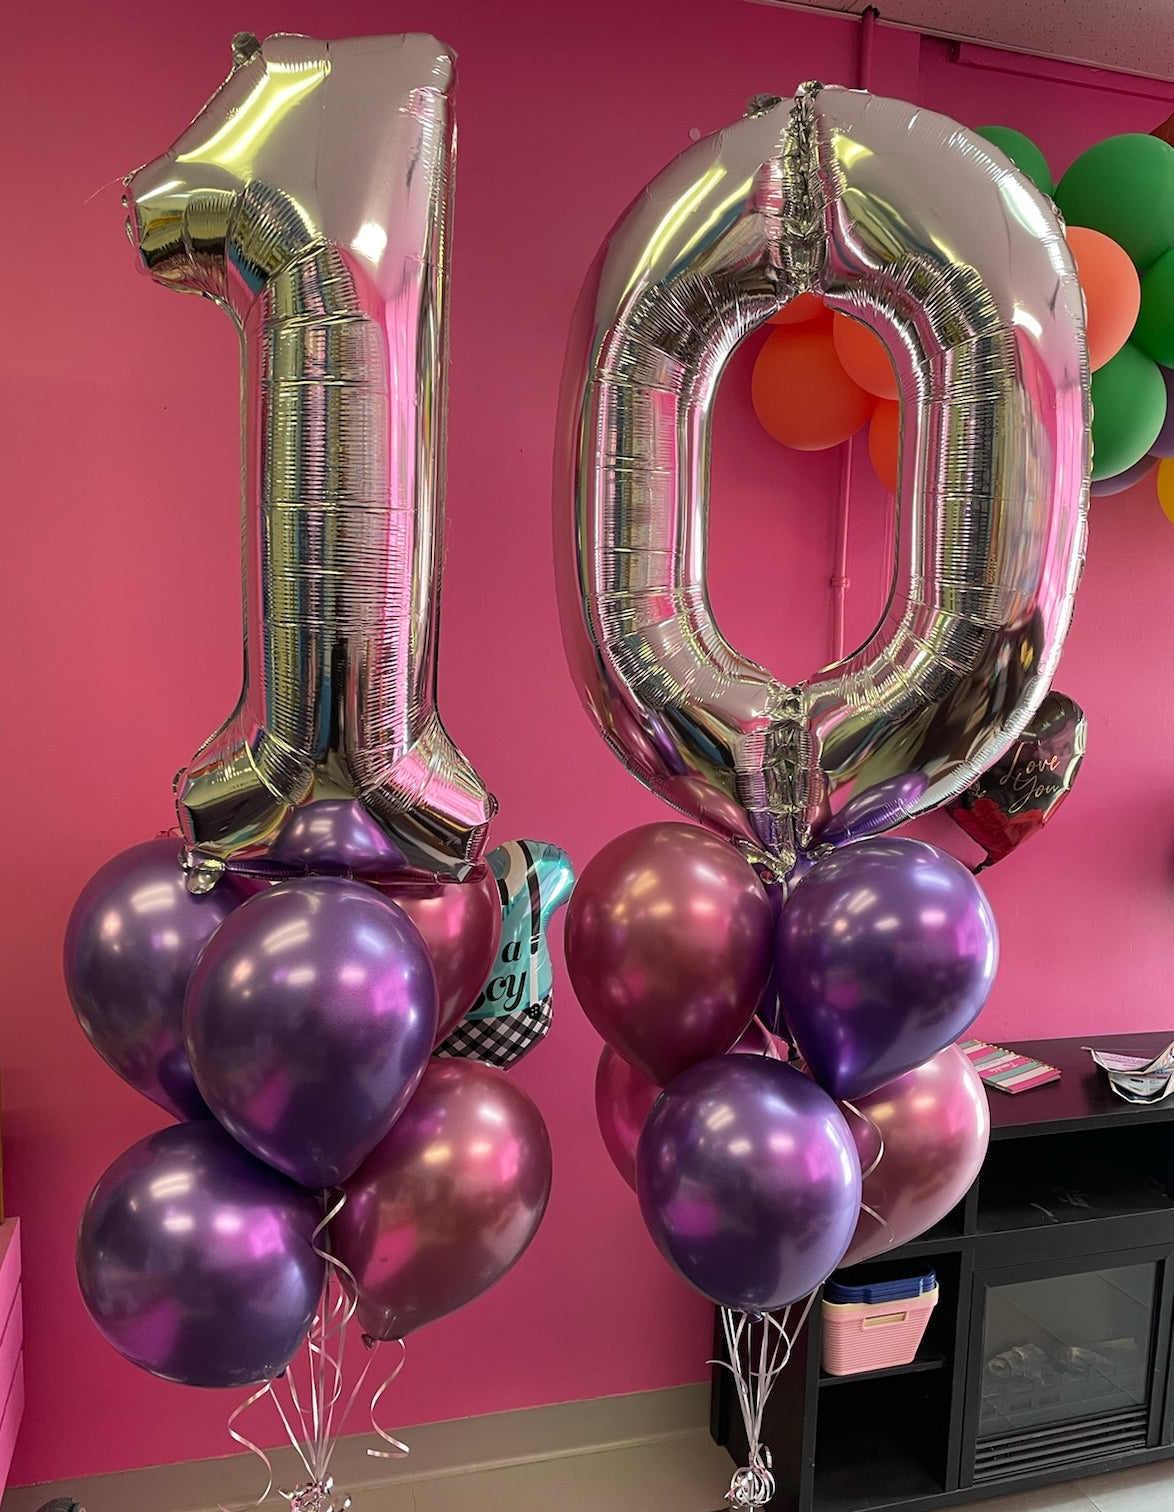 6 Ballons Blancs & Or Happy Birthday to You - Les Bambetises